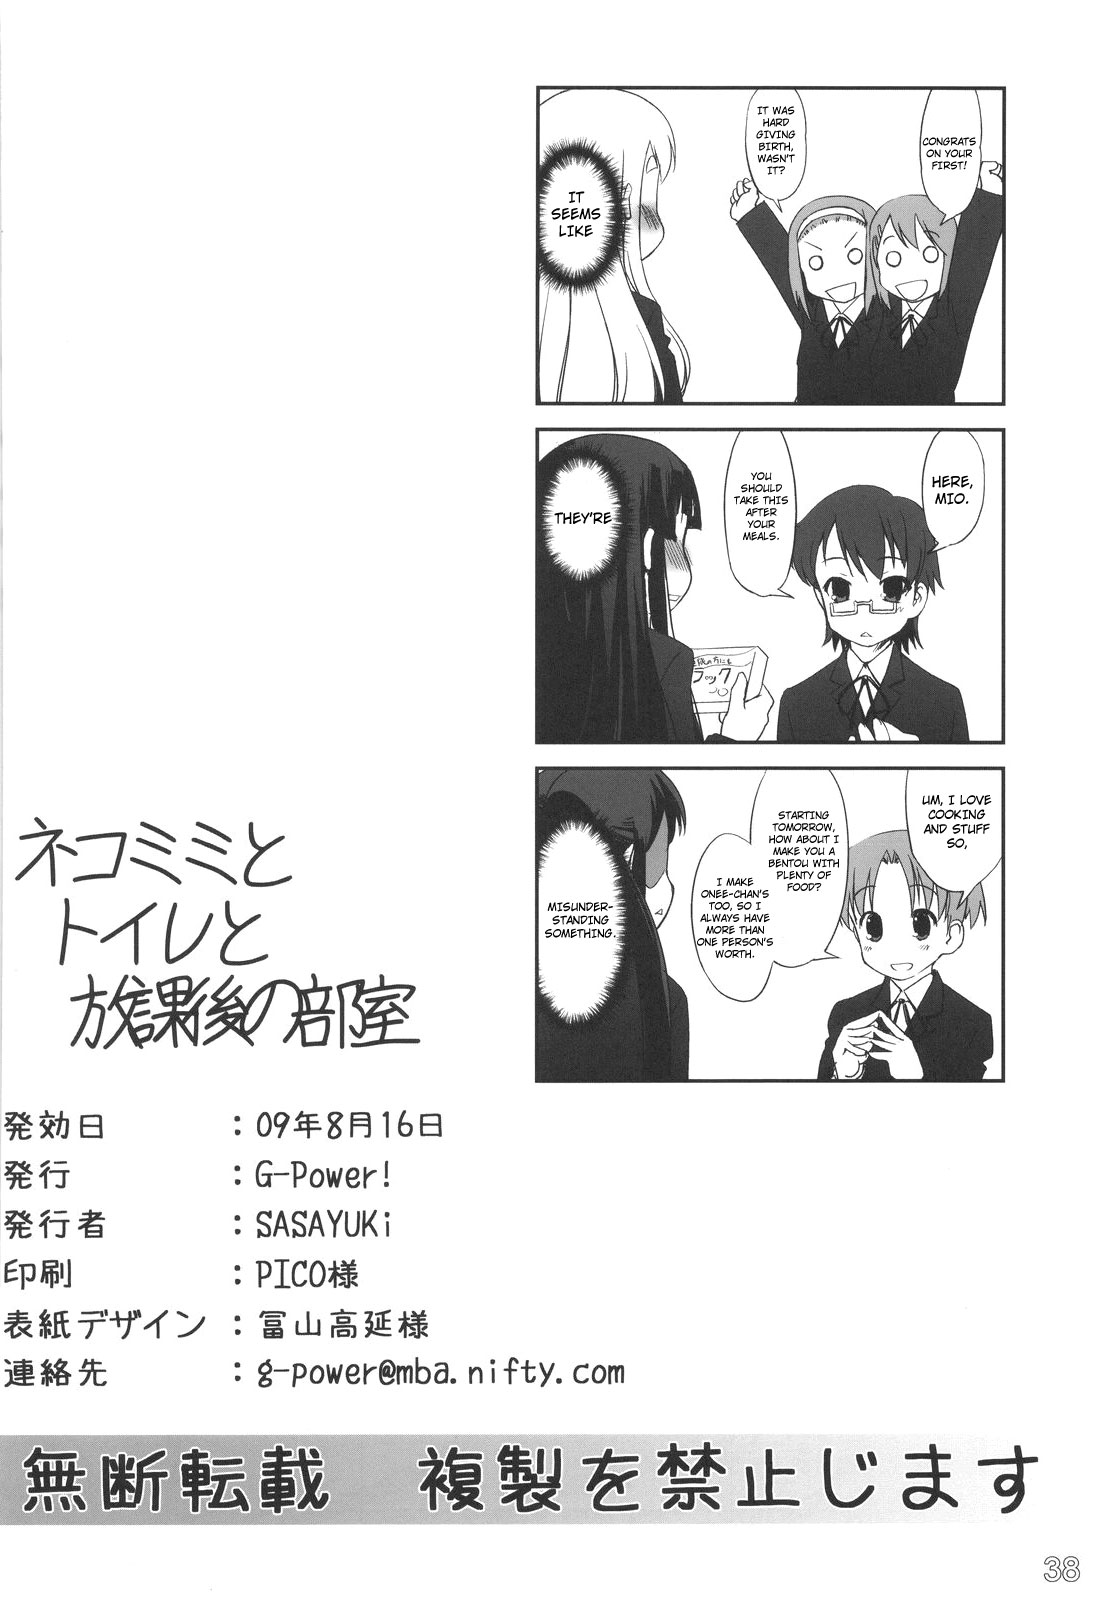 (C76) [G-Power! (Sasayuki)] Nekomimi to Toilet to Houkago no Bushitsu | Cat Ears And A Restroom And The Club Room After School (K-ON) [English] [Nicchiscans-4Dawgz] page 36 full